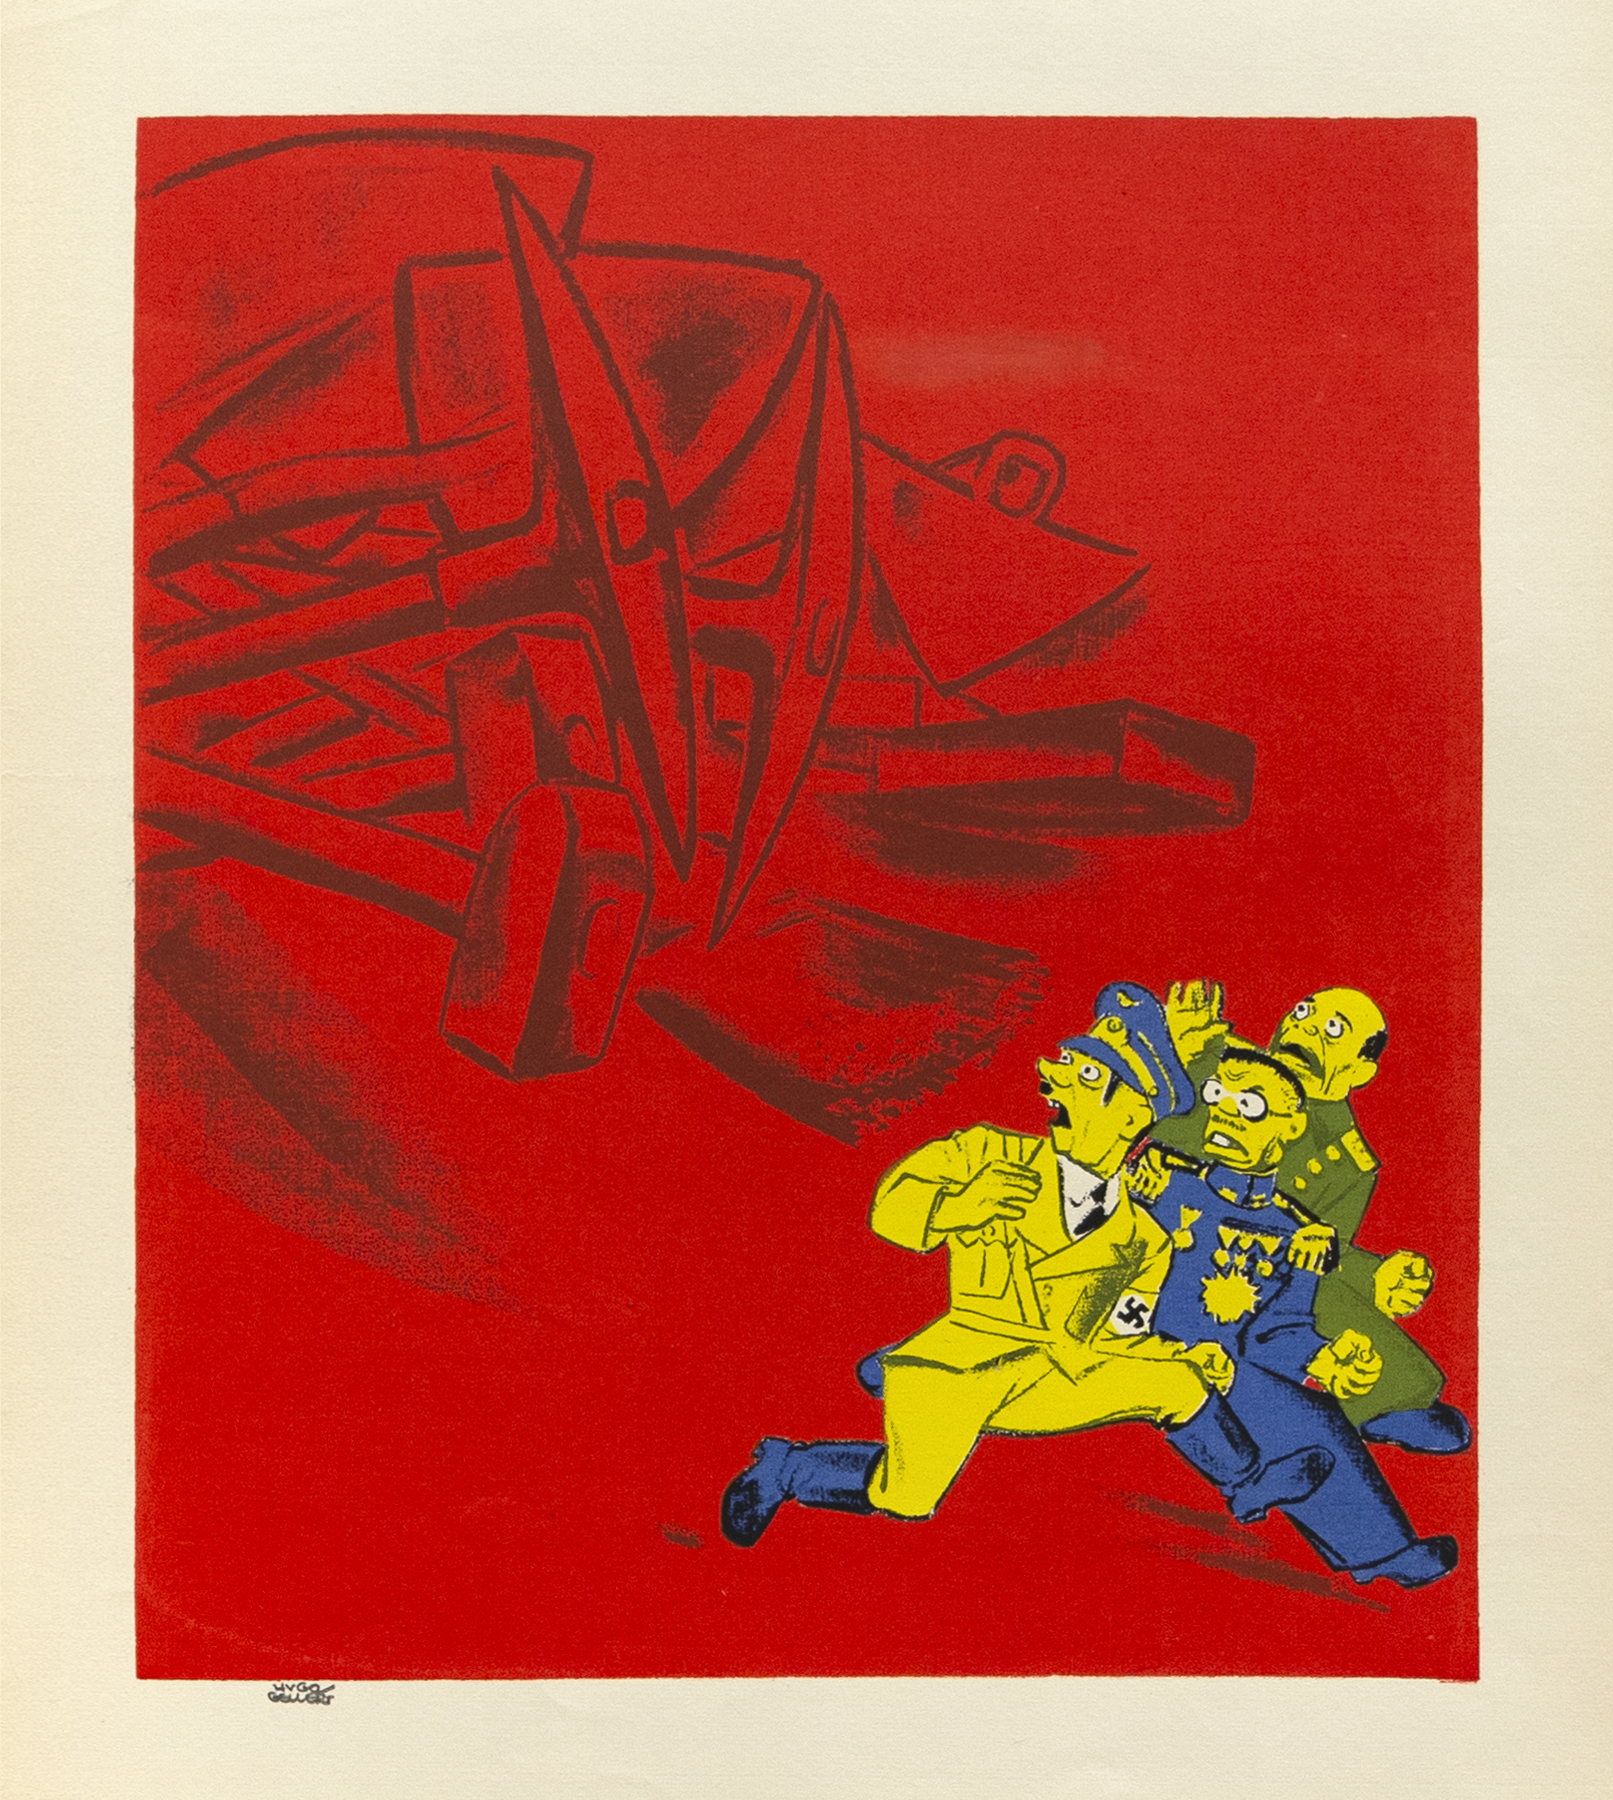 The People on the March, 1943, Silkscreen, 15 x 13 inches (38.1 x 33 cm), Edition of 54